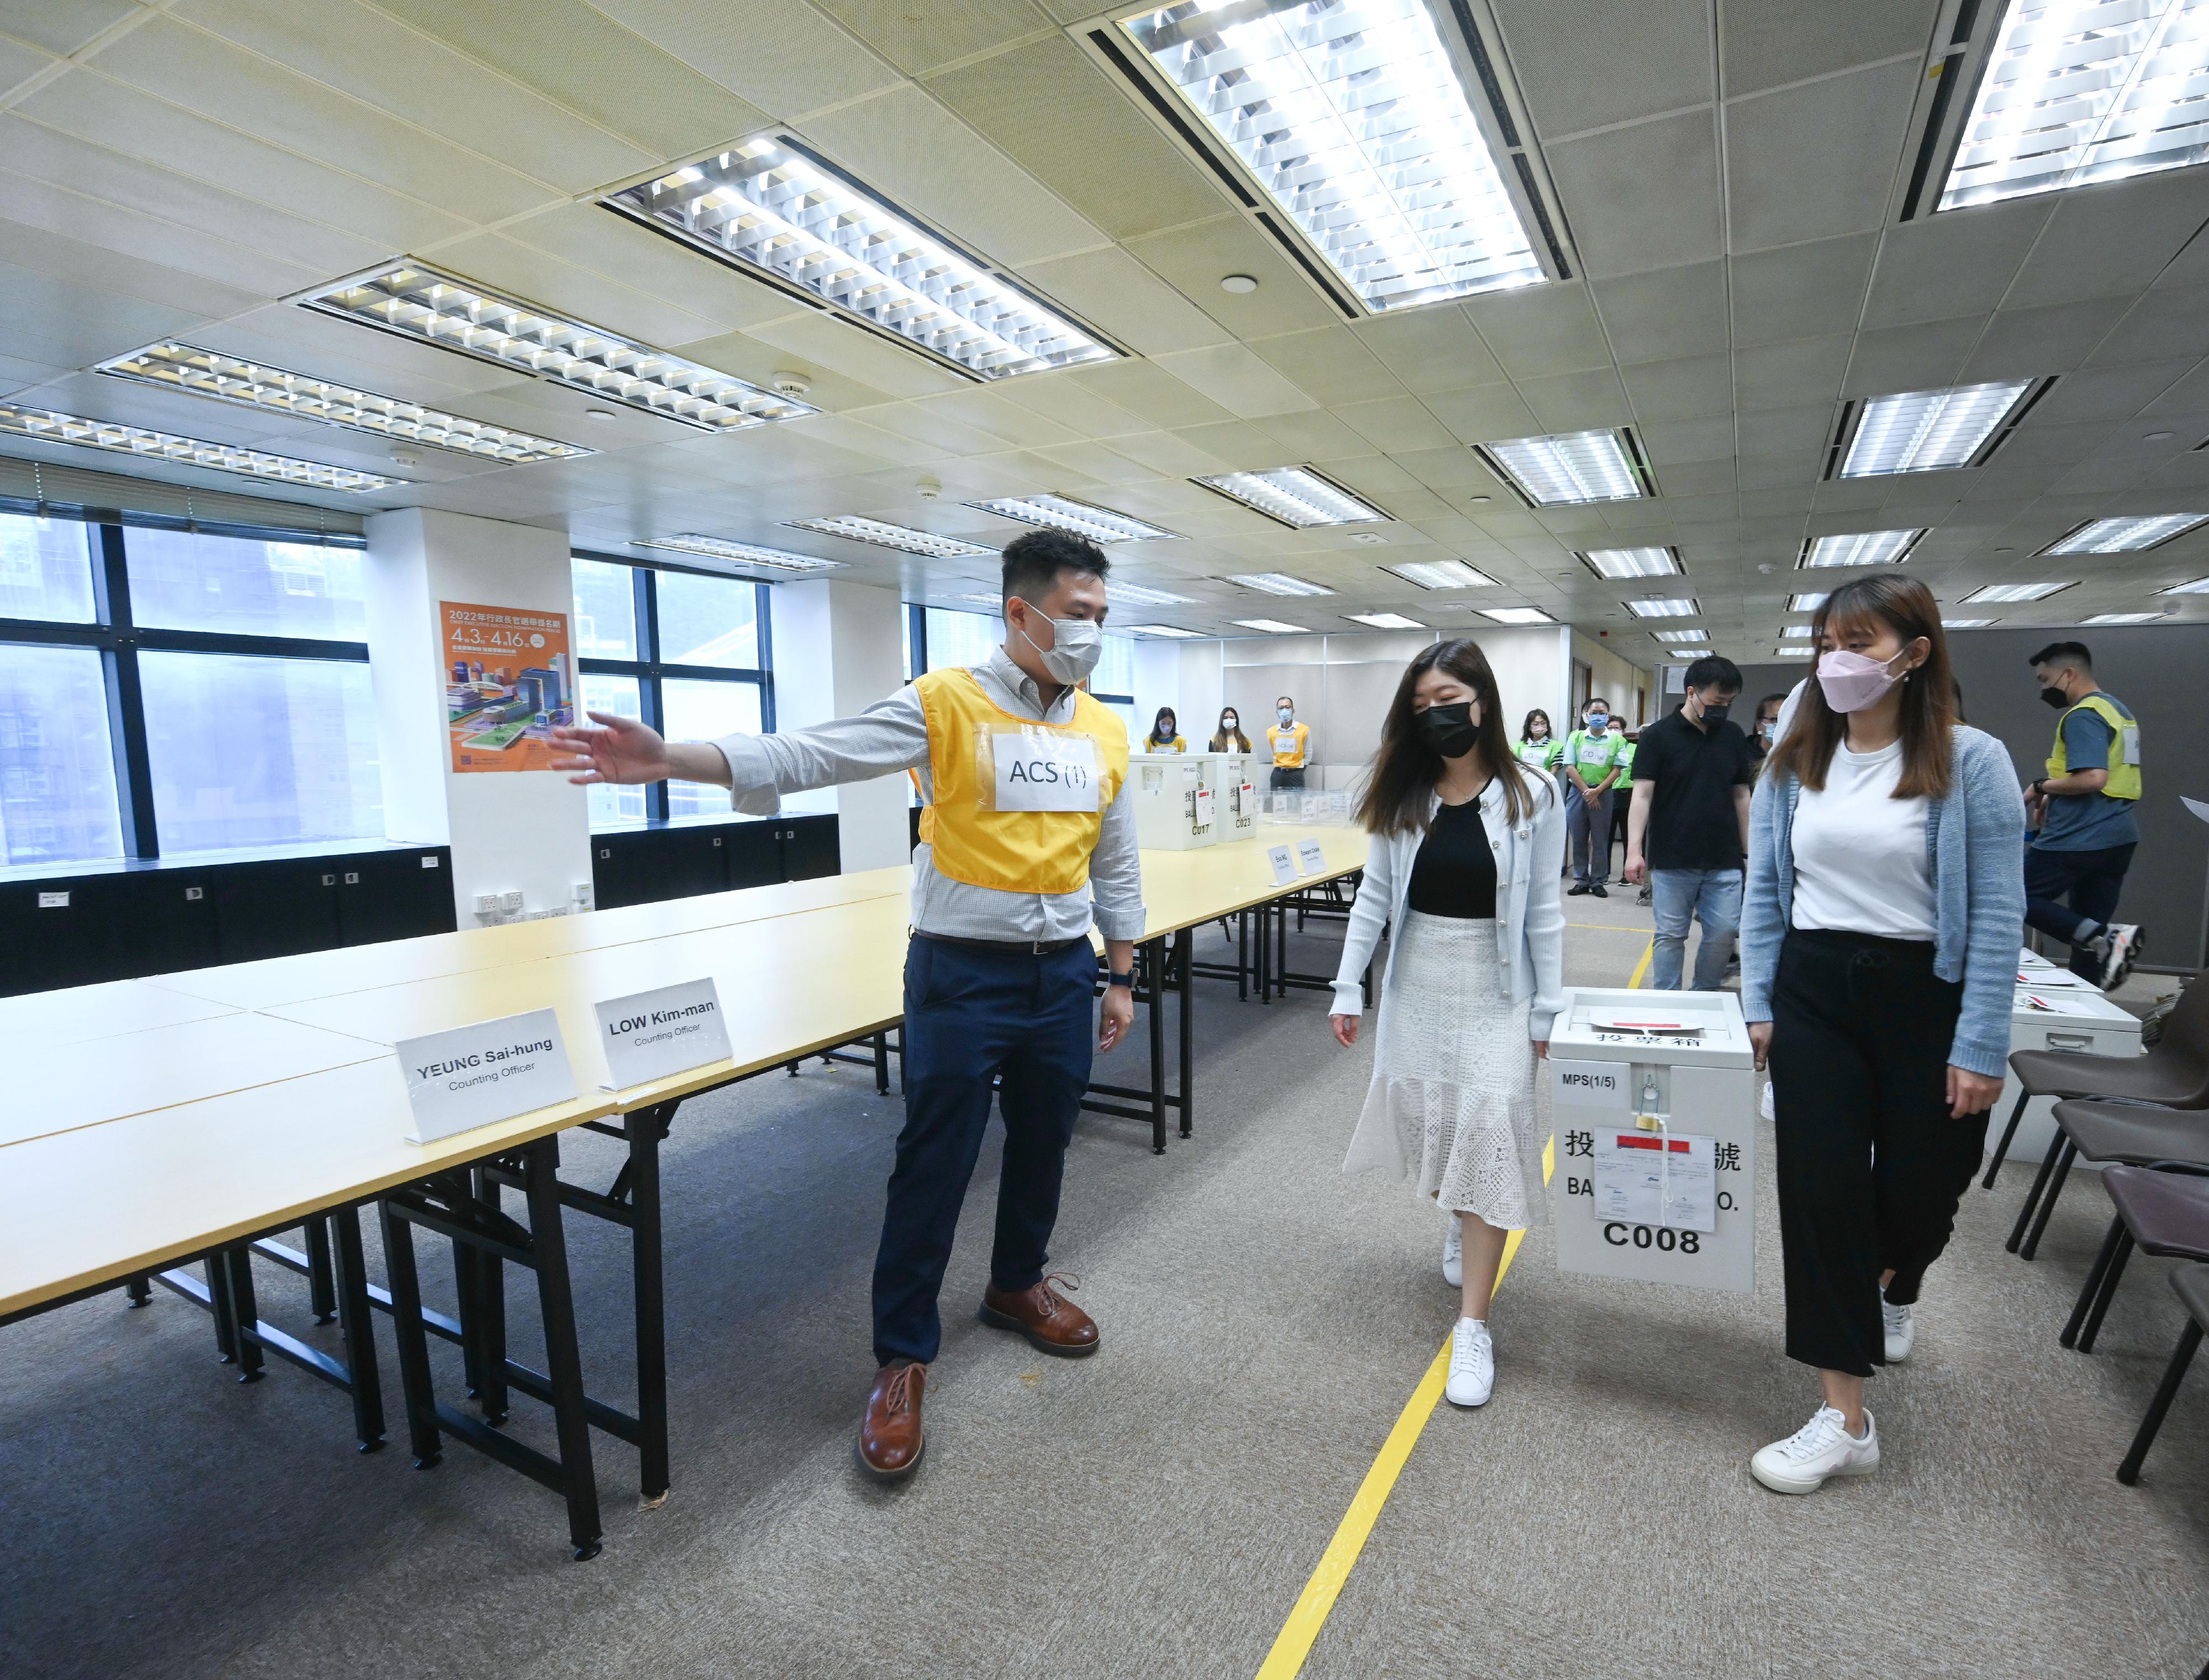 The 2022 Chief Executive Election will be held on May 8. The Registration and Electoral Office arranged, over the past few days, online and hands-on training sessions for electoral staff who will work in the main polling station and the central counting station. Photo shows electoral staff in a simulation of delivering a ballot box to the central counting station.